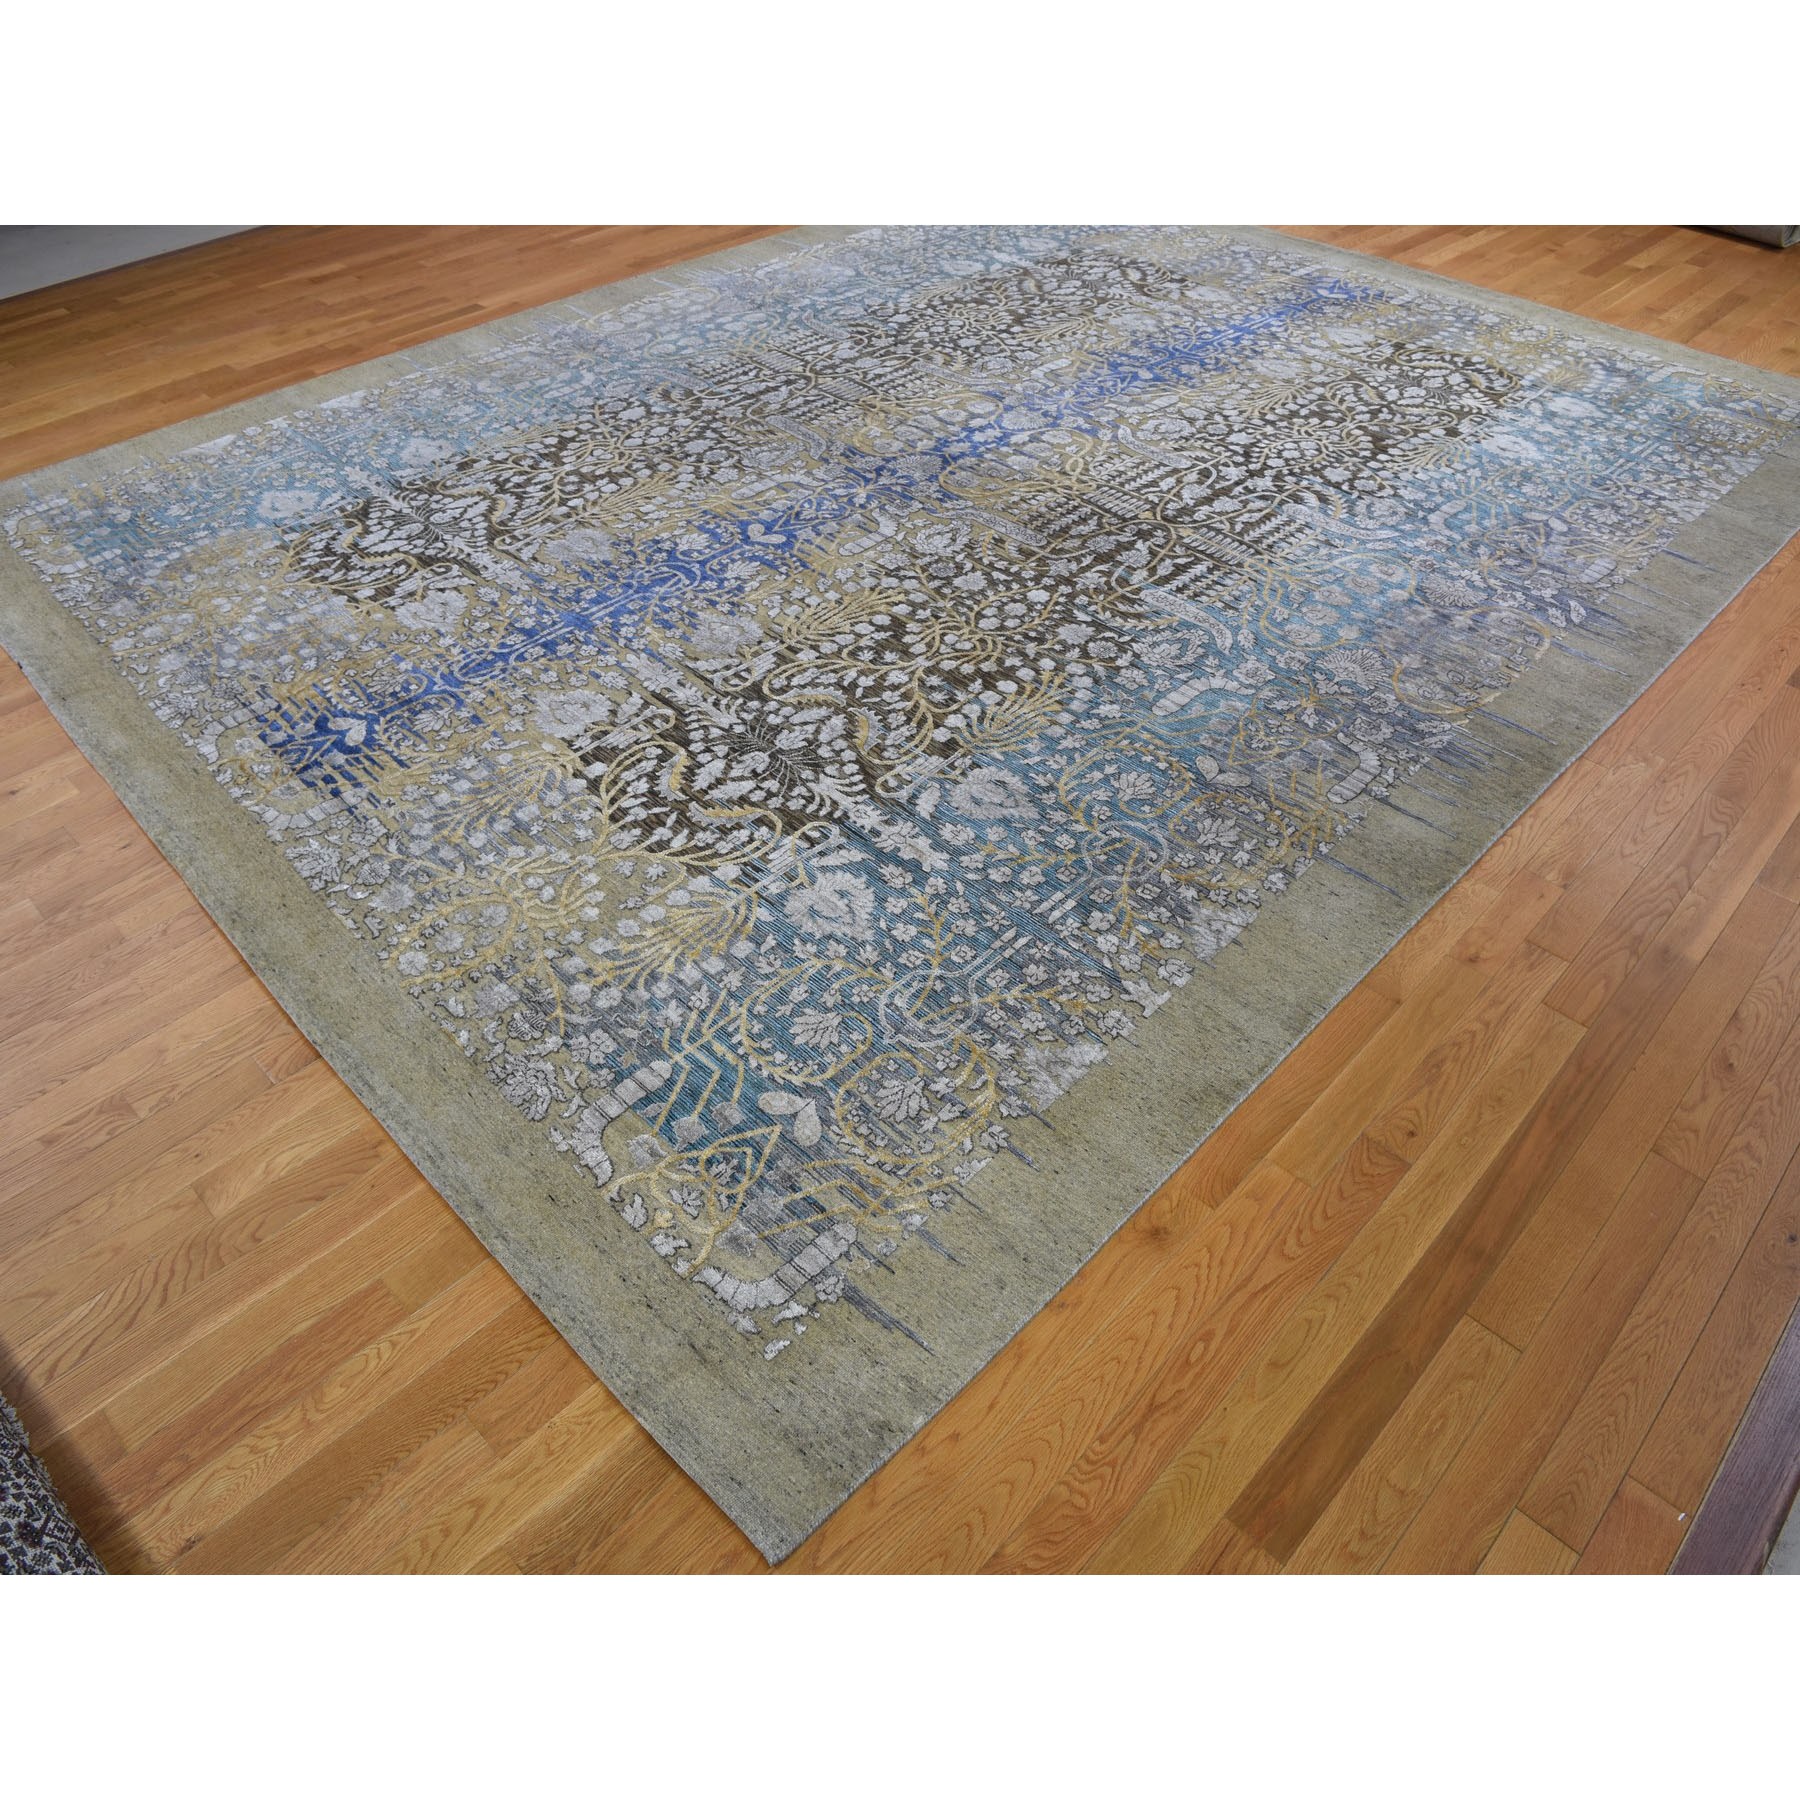 12'2"x15'4" Oversized Silk with Textured Wool Transitional Sarouk Hand Woven Oriental Rug 